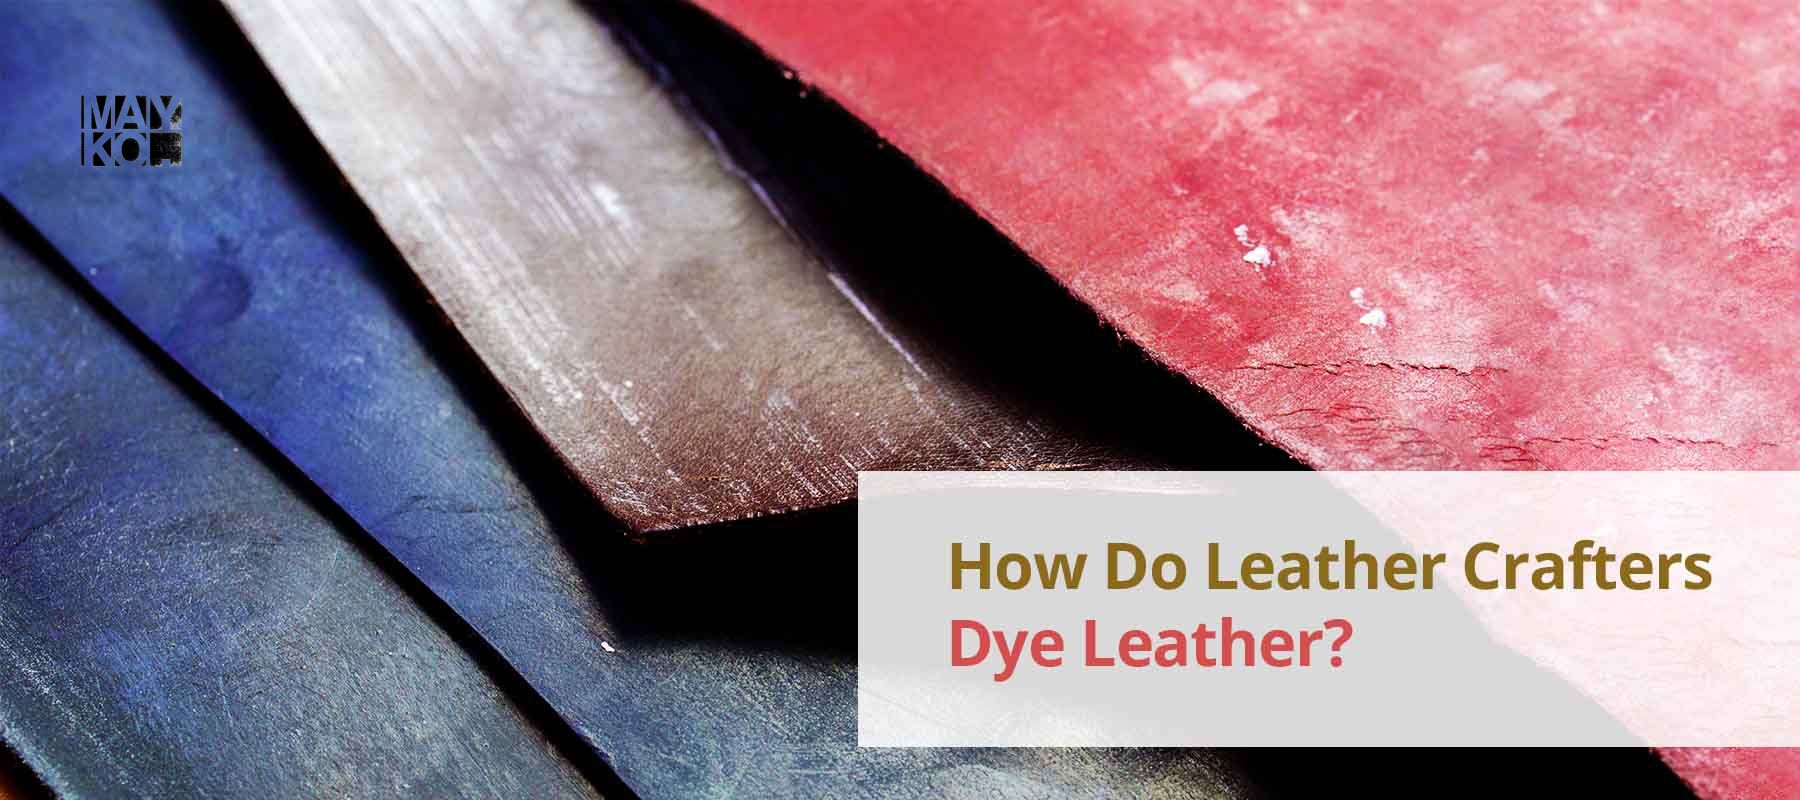 How Do Leather Crafters Dye Leather?